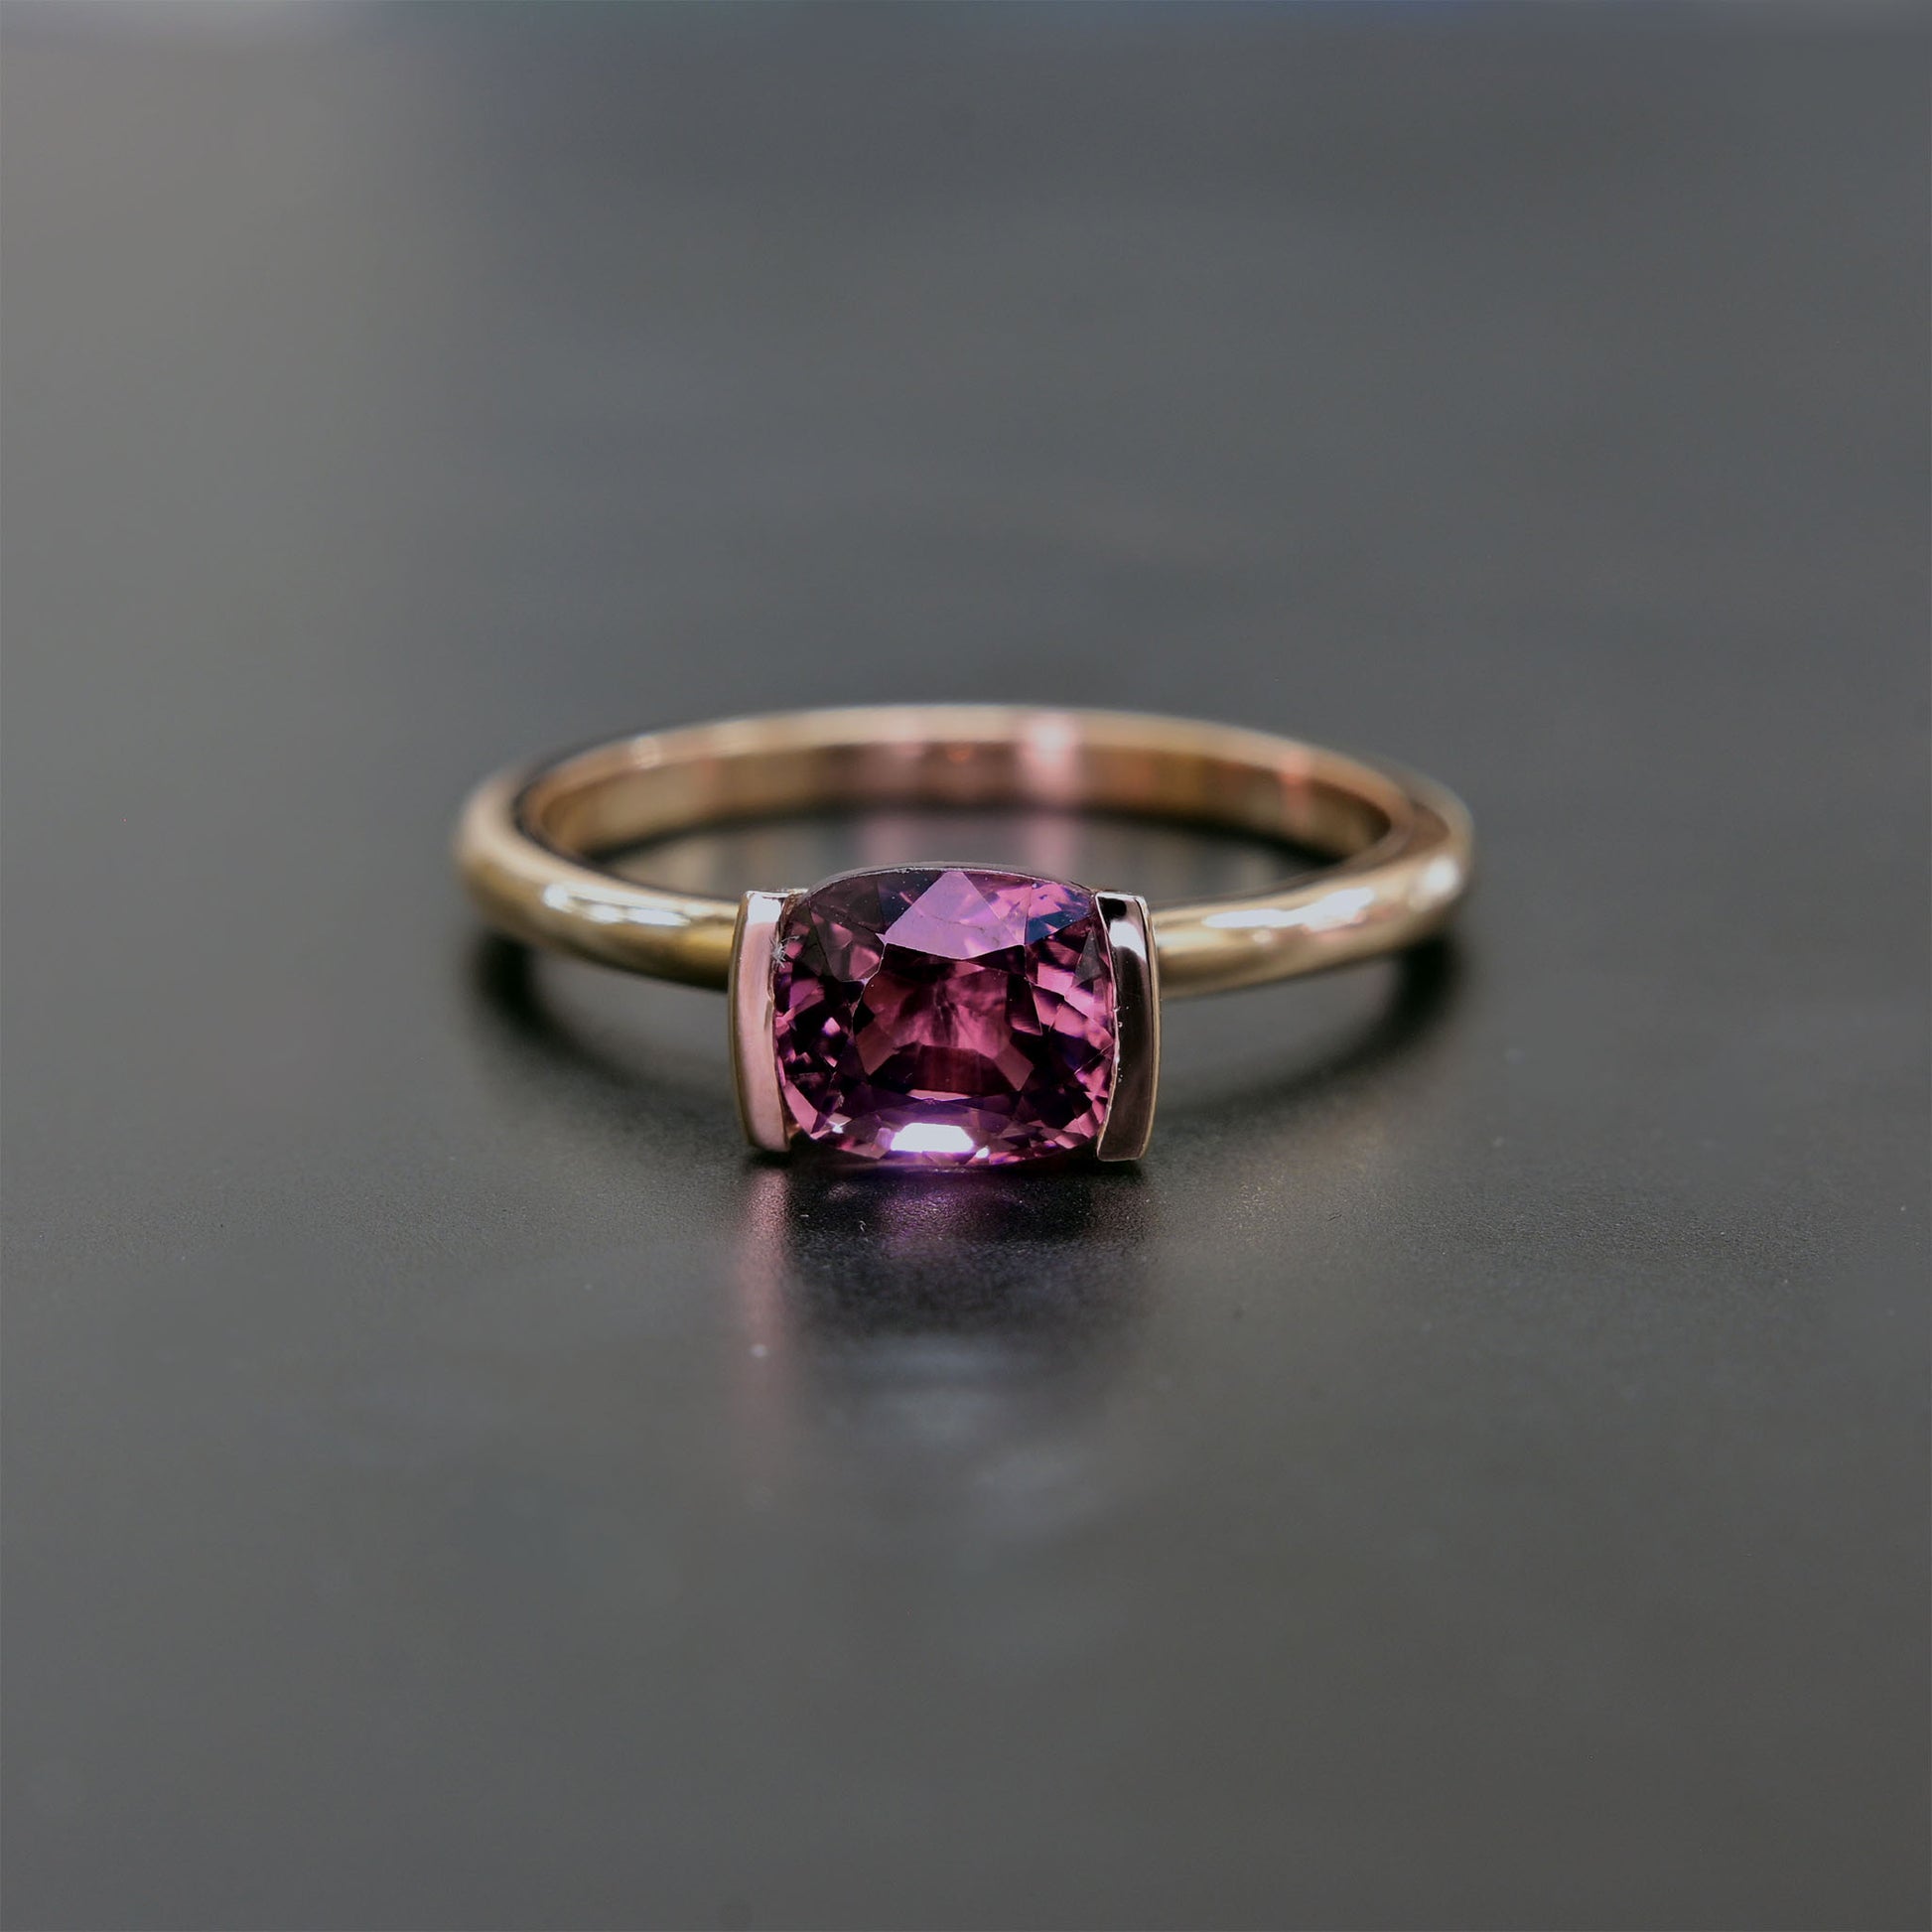 Purple pink spinel ring